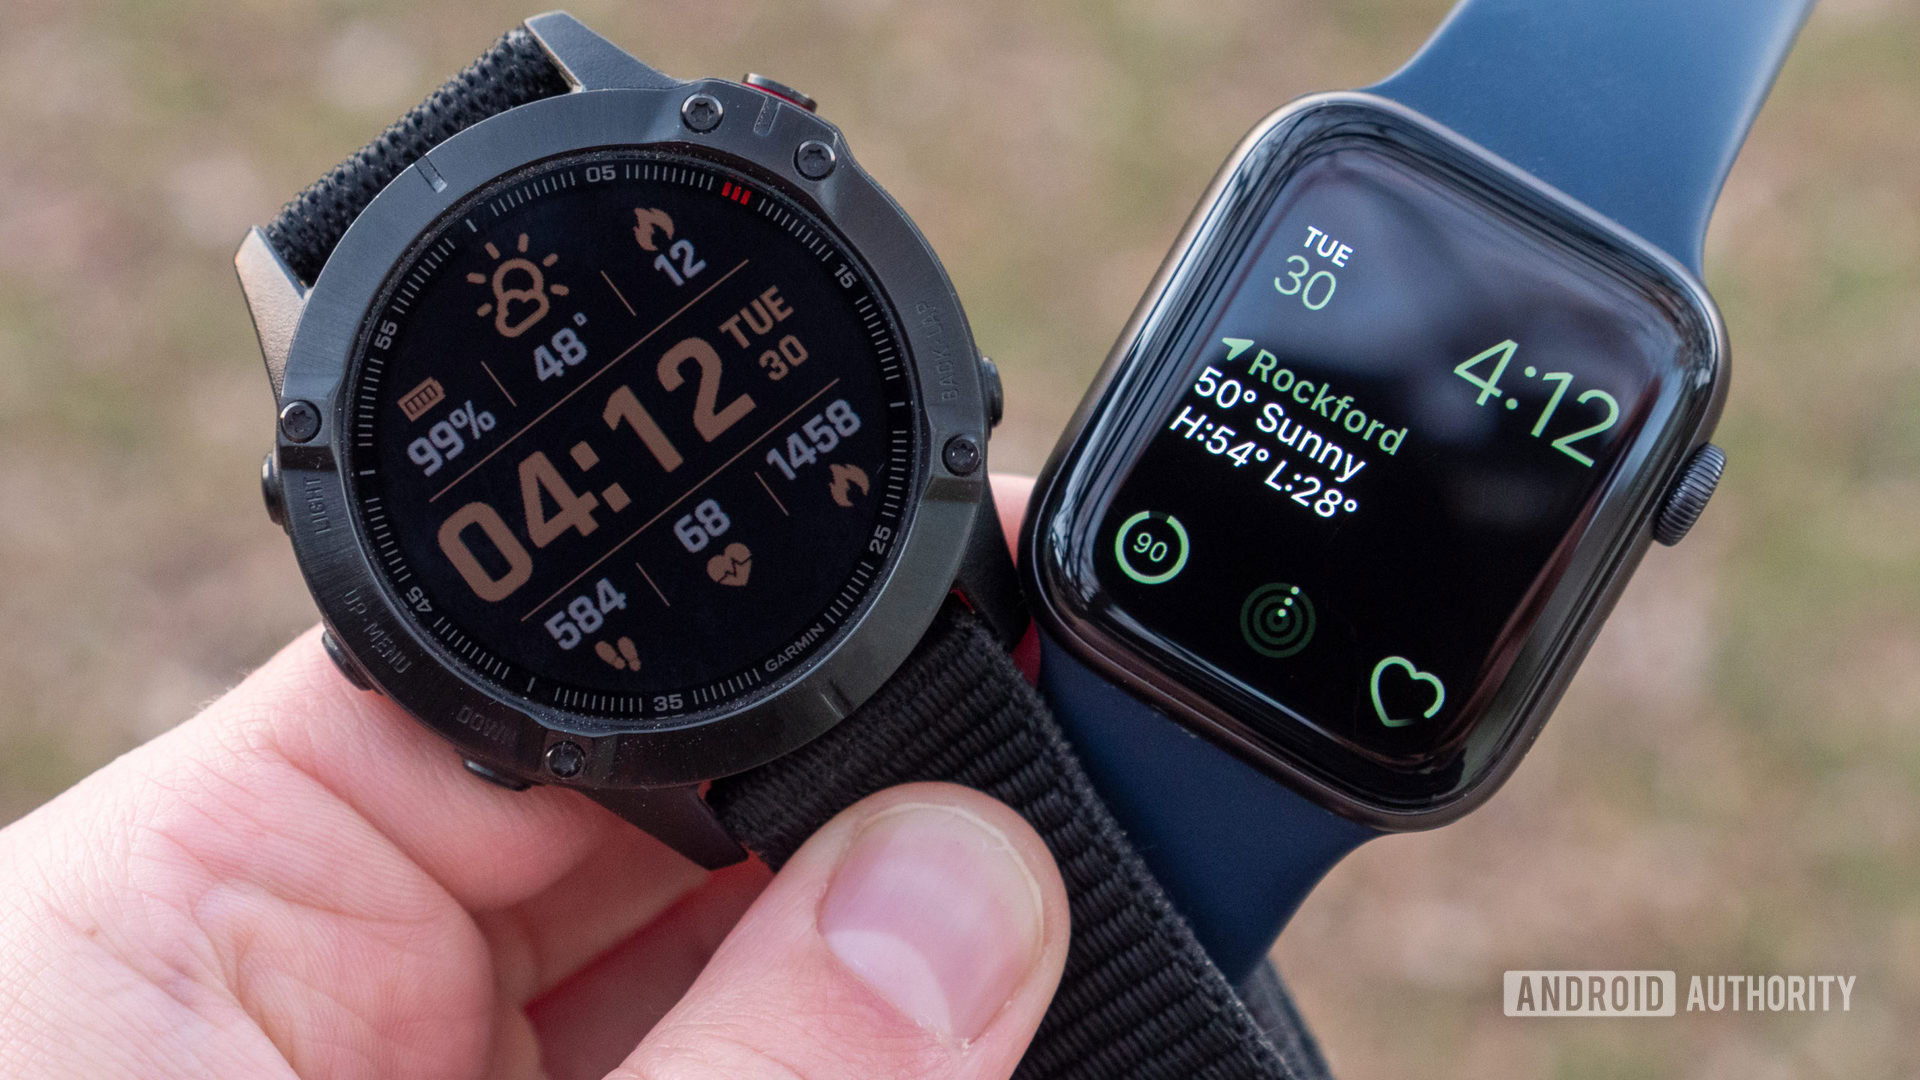 Apple Watch vs Garmin: Which is the platform? Android Authority